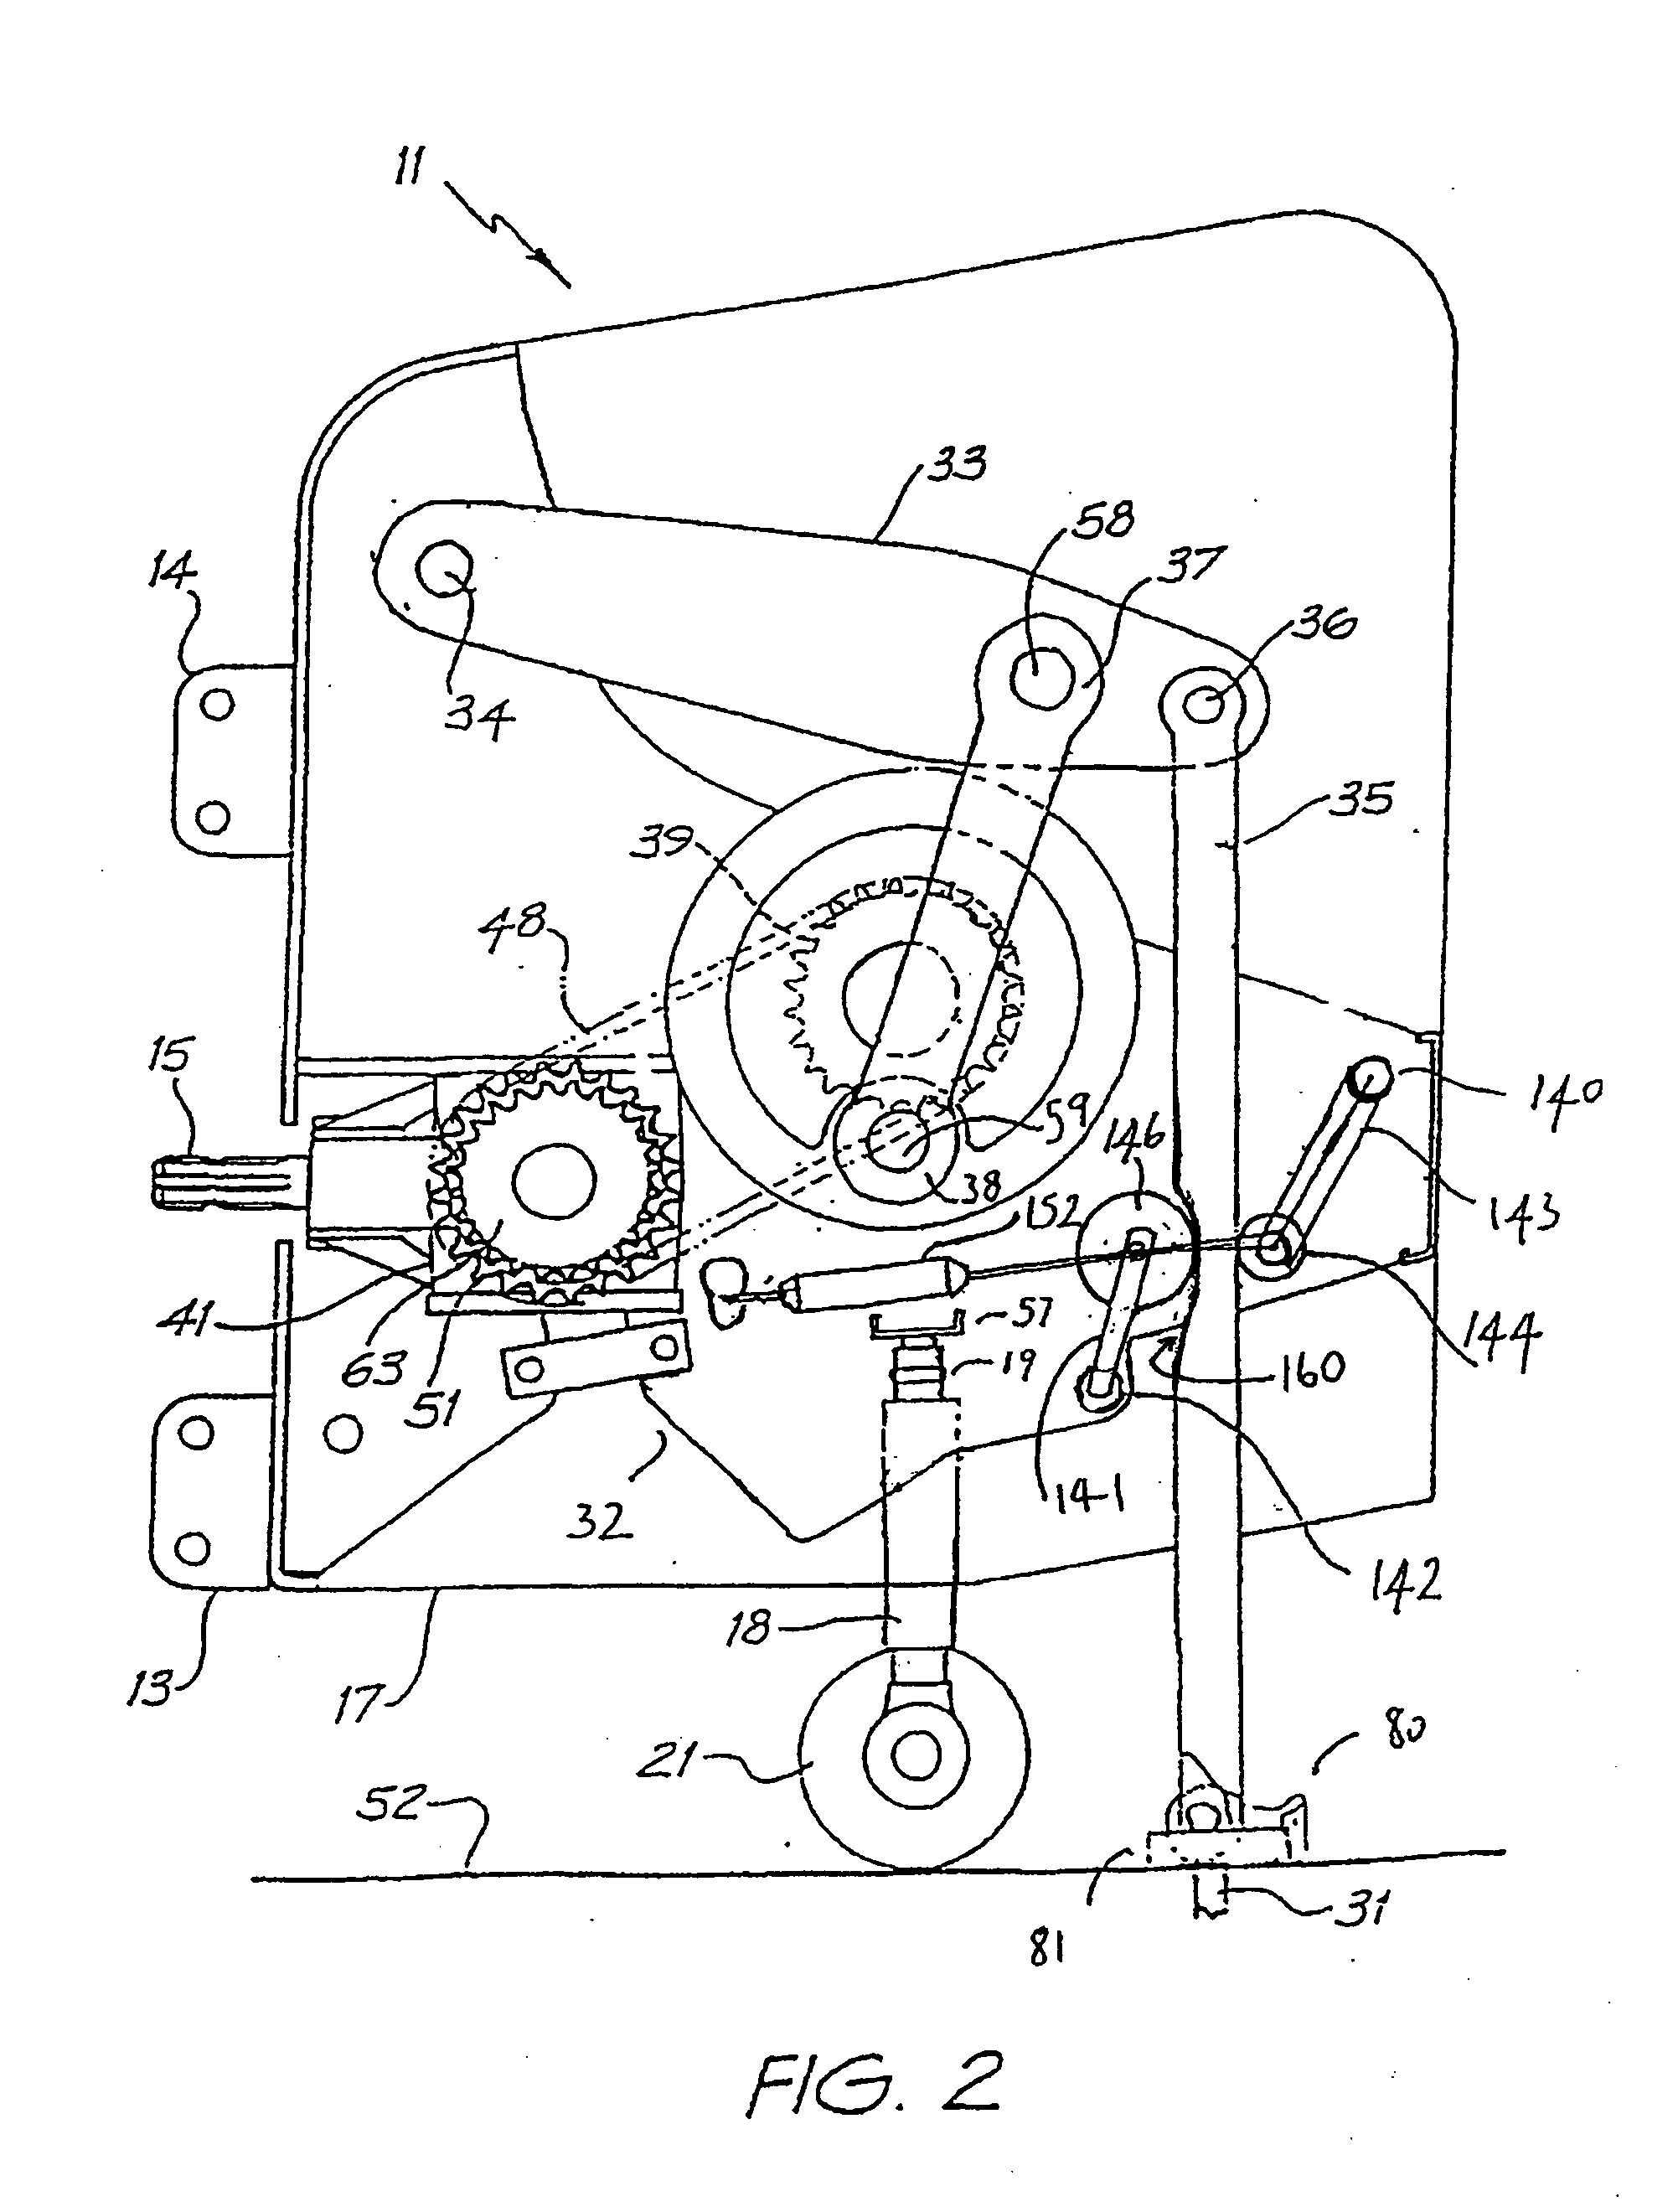 Aerator mechanism with vertically reciprocating tine